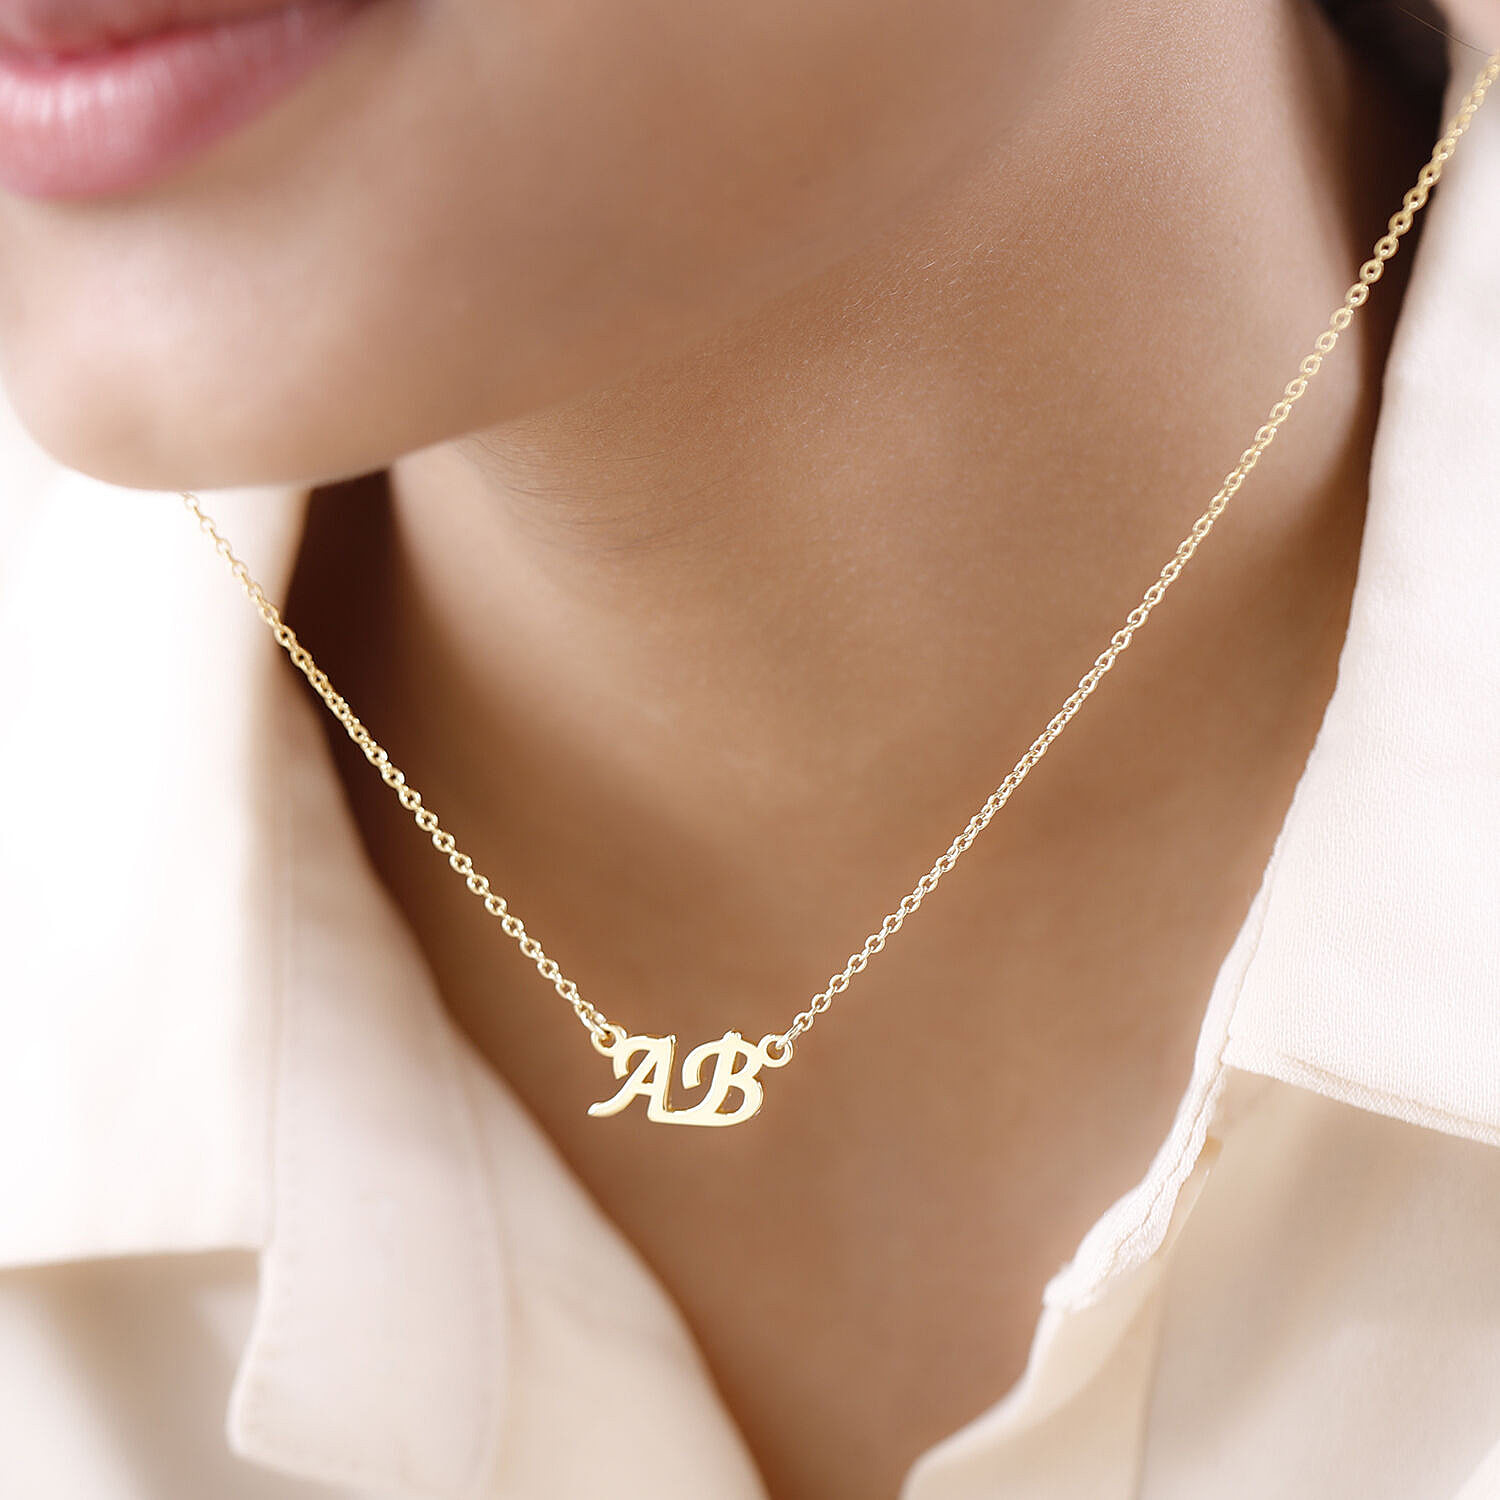 Two Initials Personalized Necklace 14K Gold 2 Initials Necklace Gift Monogram  Necklace – Fine Jewelry by Anastasia Savenko